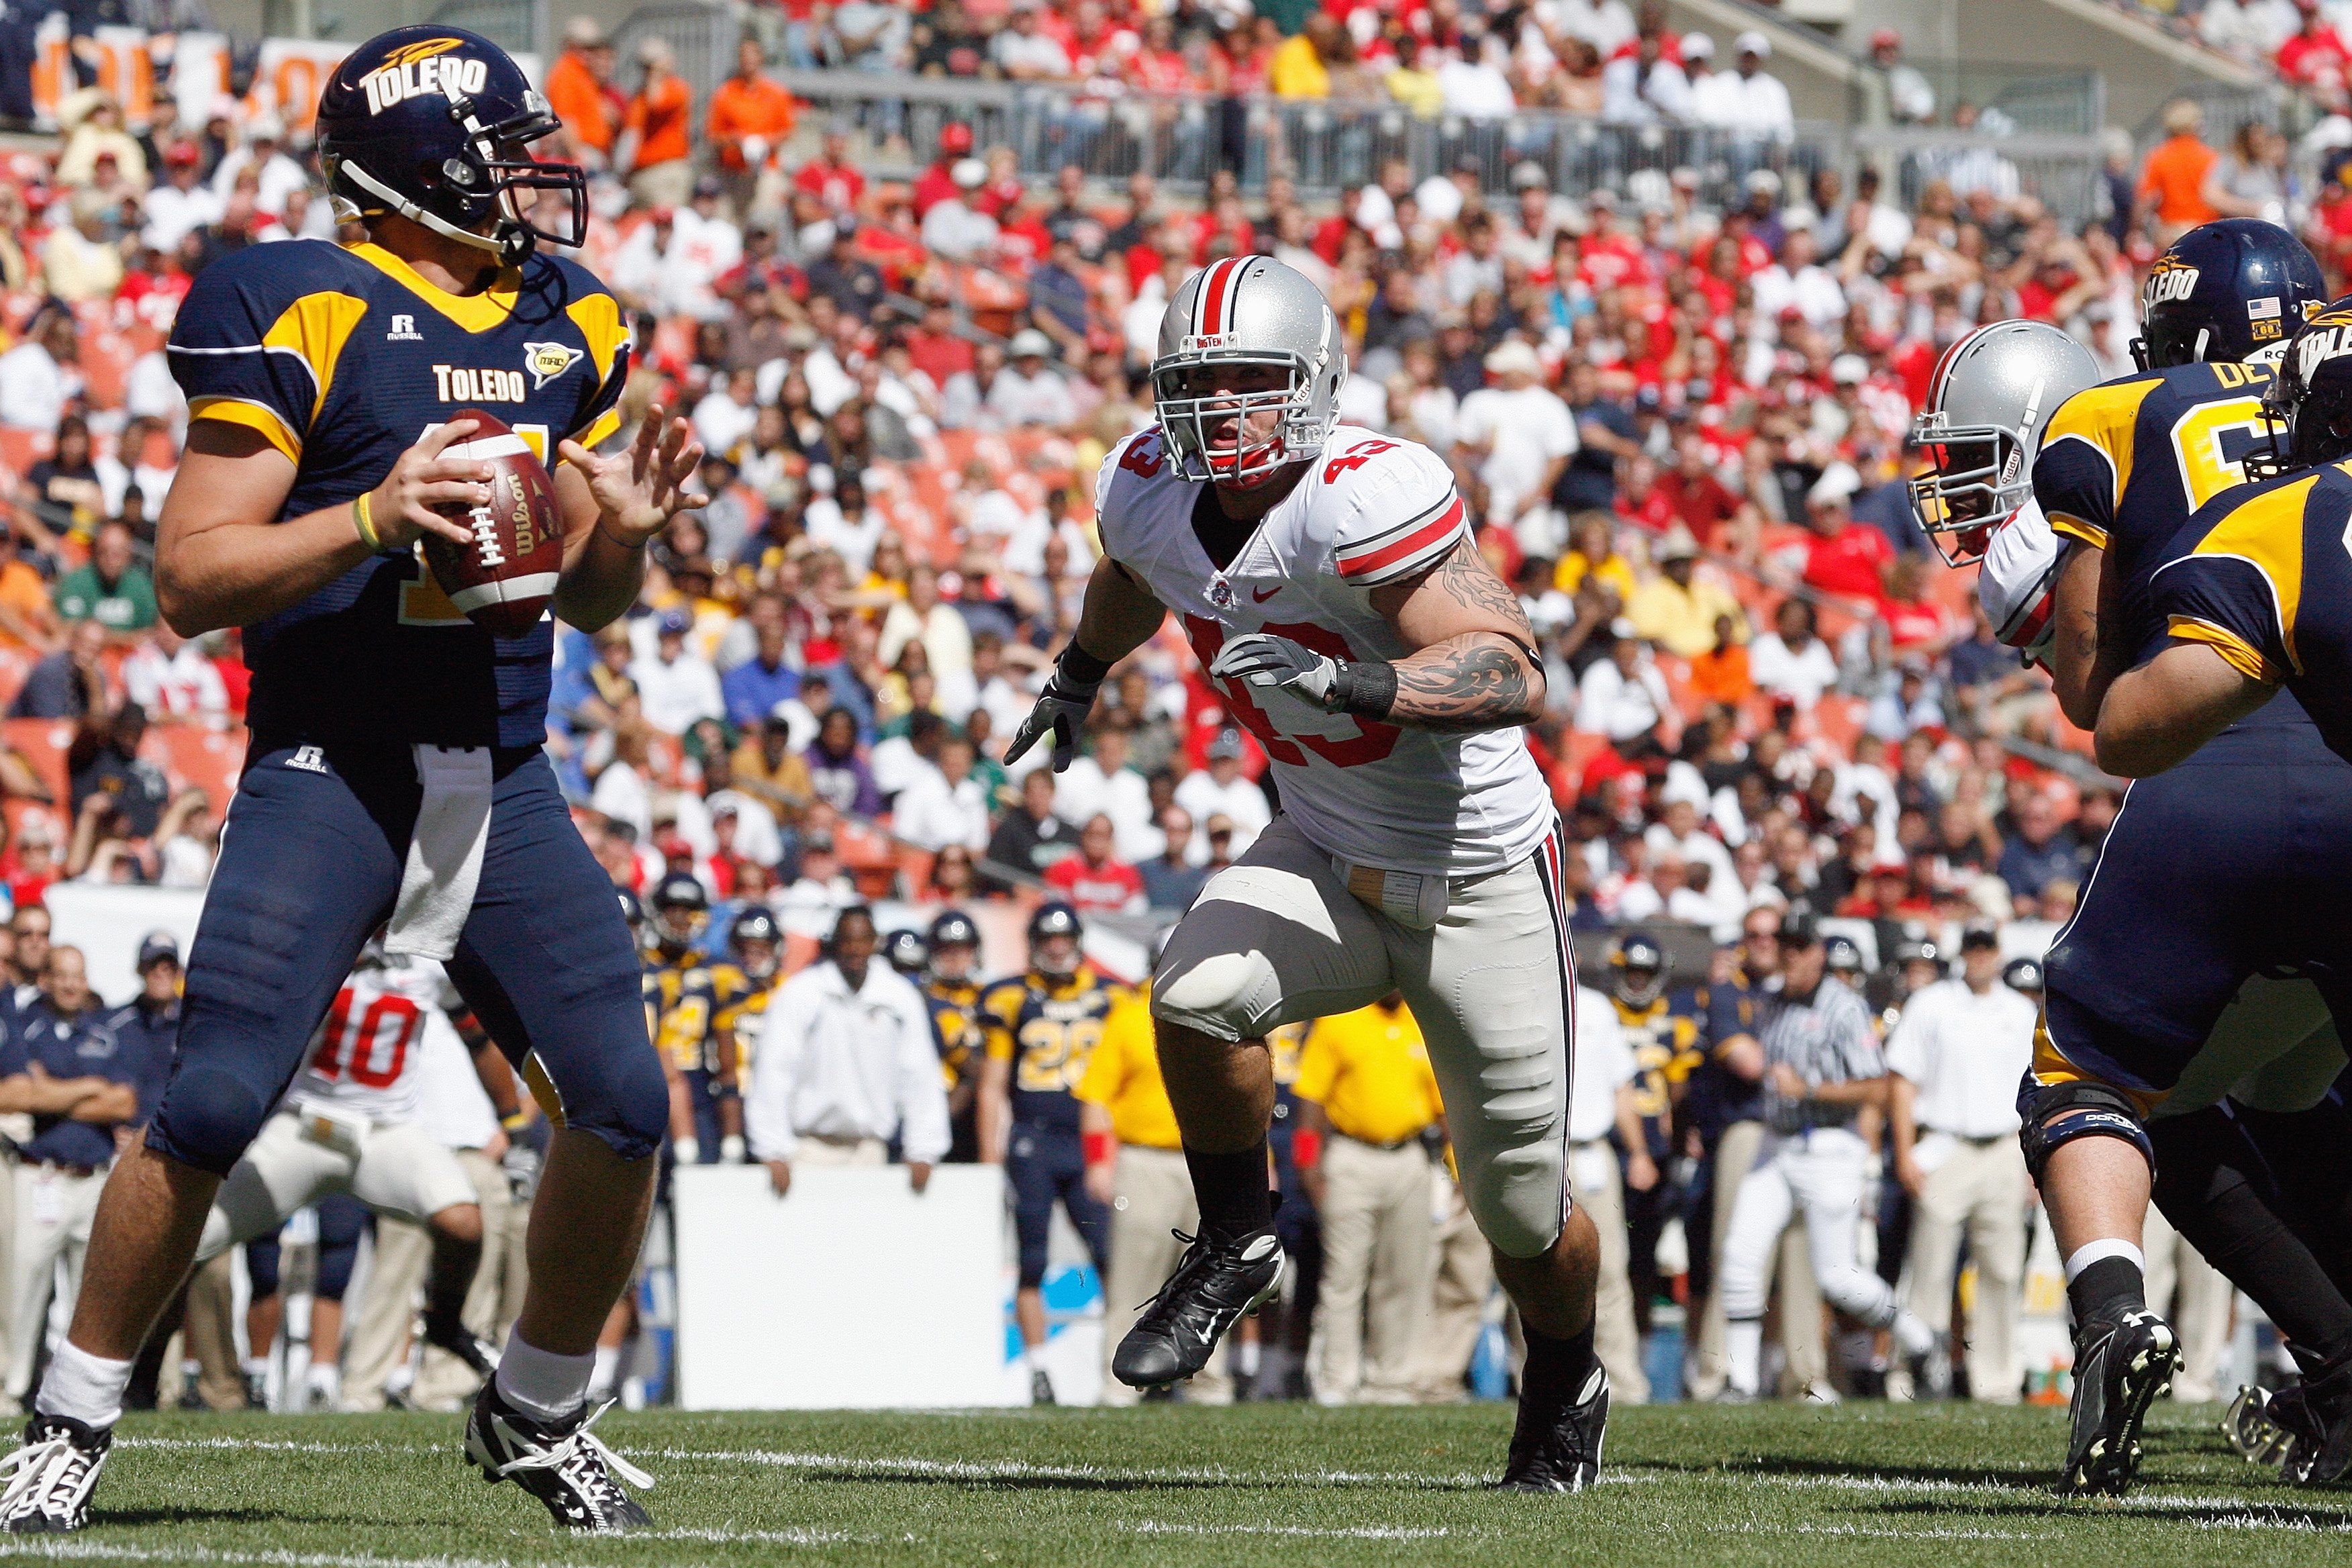 CLEVELAND - SEPTEMBER 19: Nathan Williams #43 of the Ohio State Buckeyes rushes quarterback Aaron Opelt #11 the Toledo Rockets at Cleveland Browns Stadium on September 19, 2009 in Cleveland, Ohio. The Ohio State Buckeyes shutout the Toledo Rockets 38-0. (